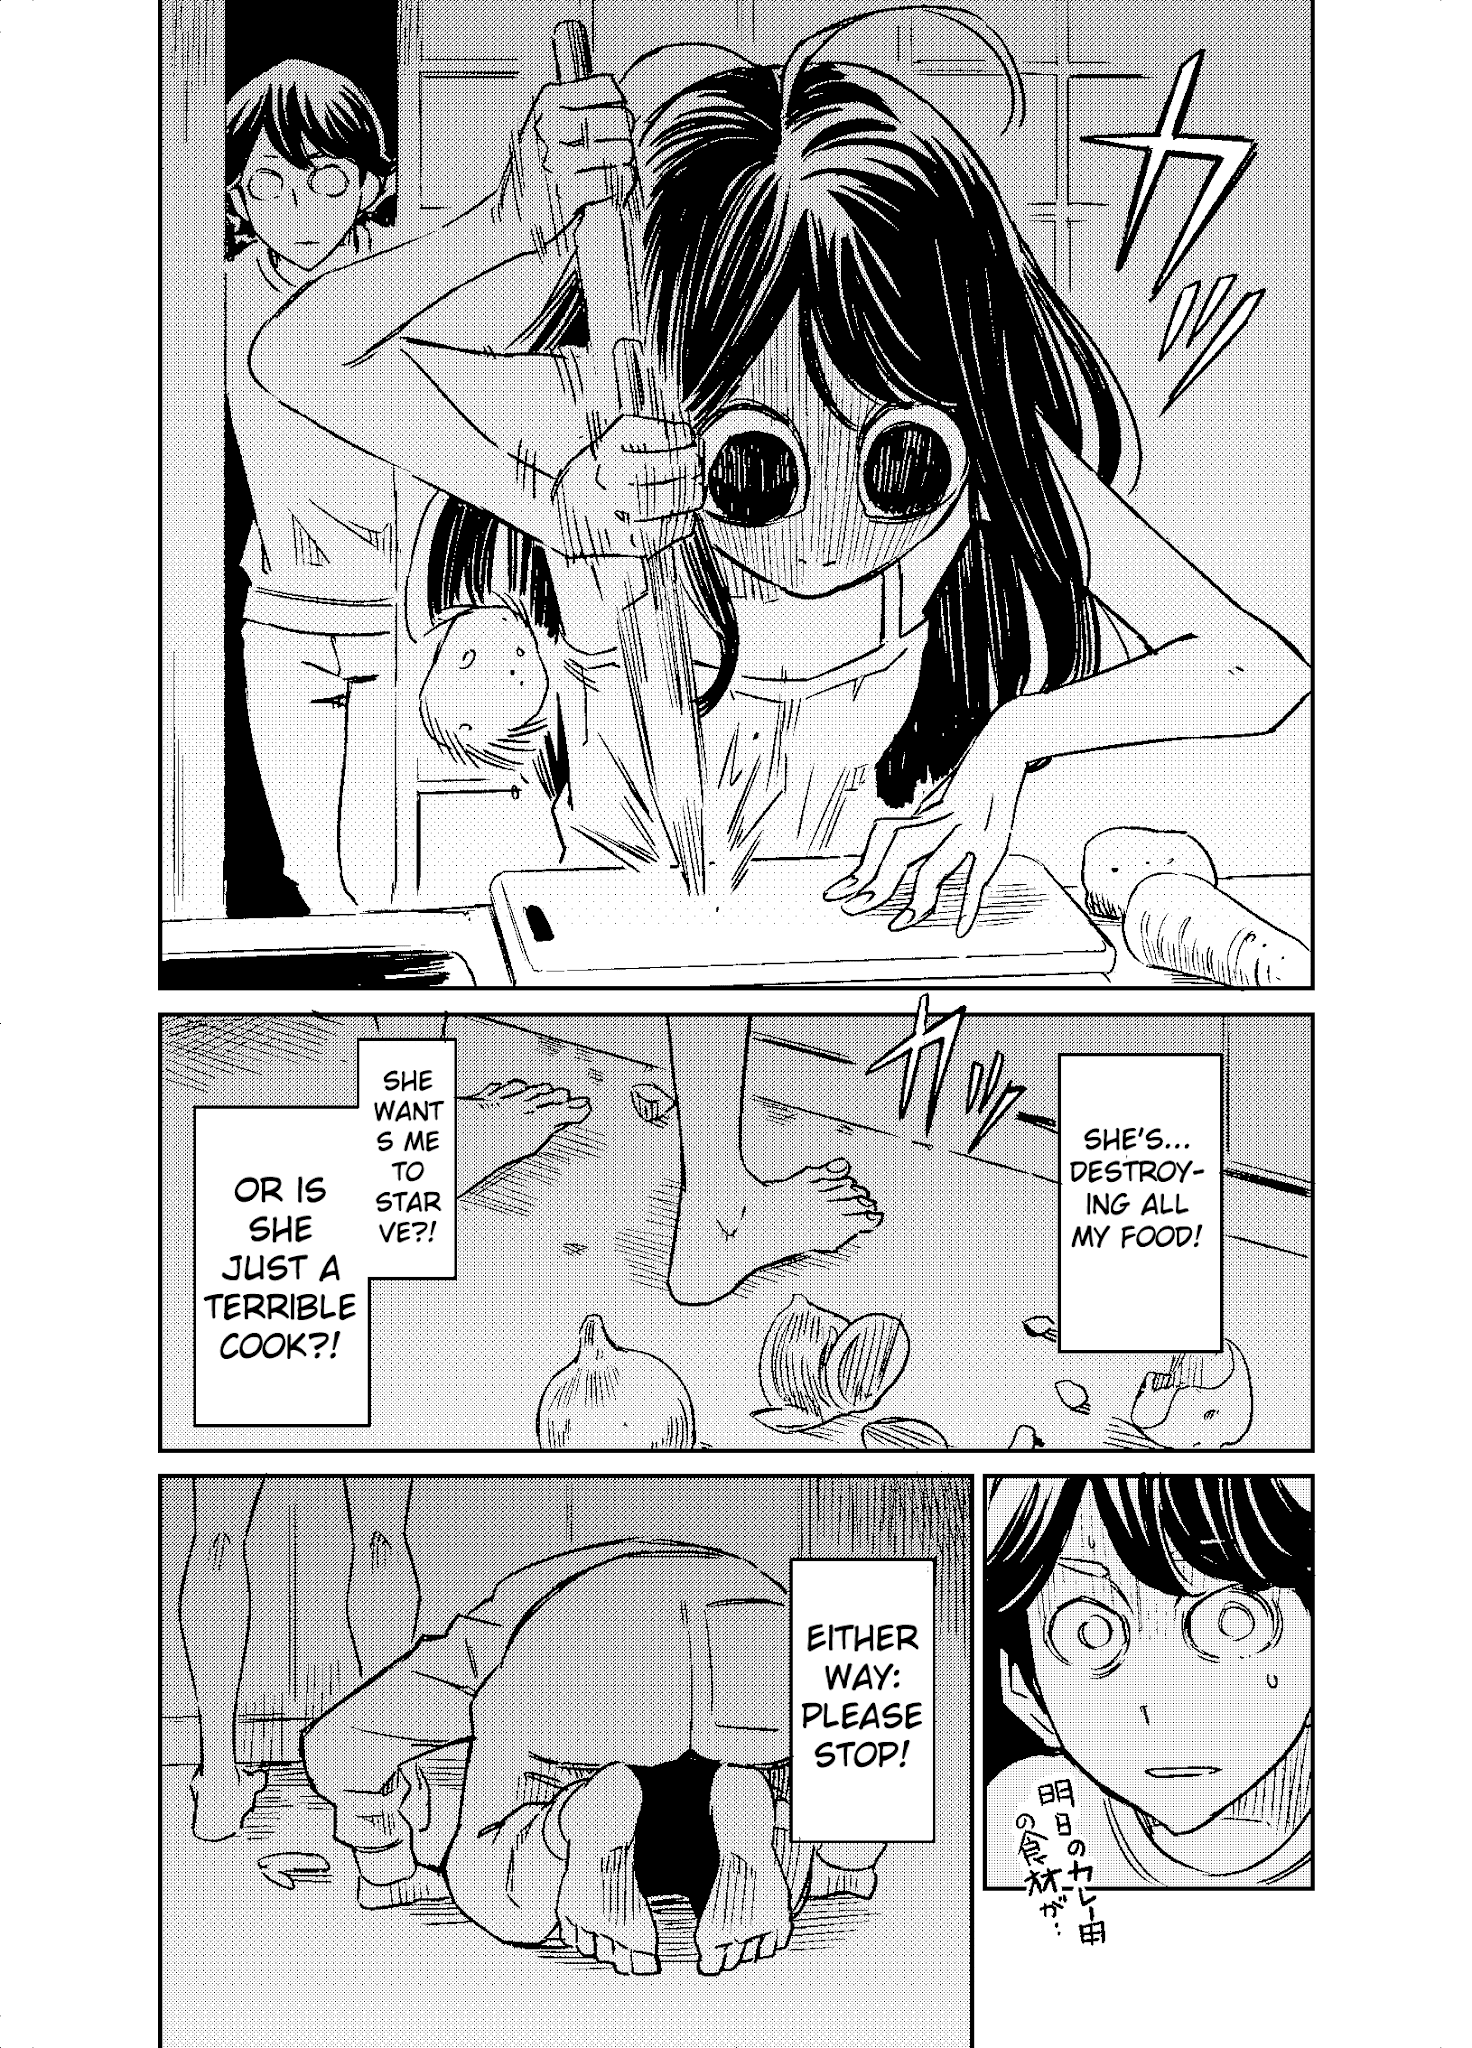 My Roommate Isn't From This World - Page 2